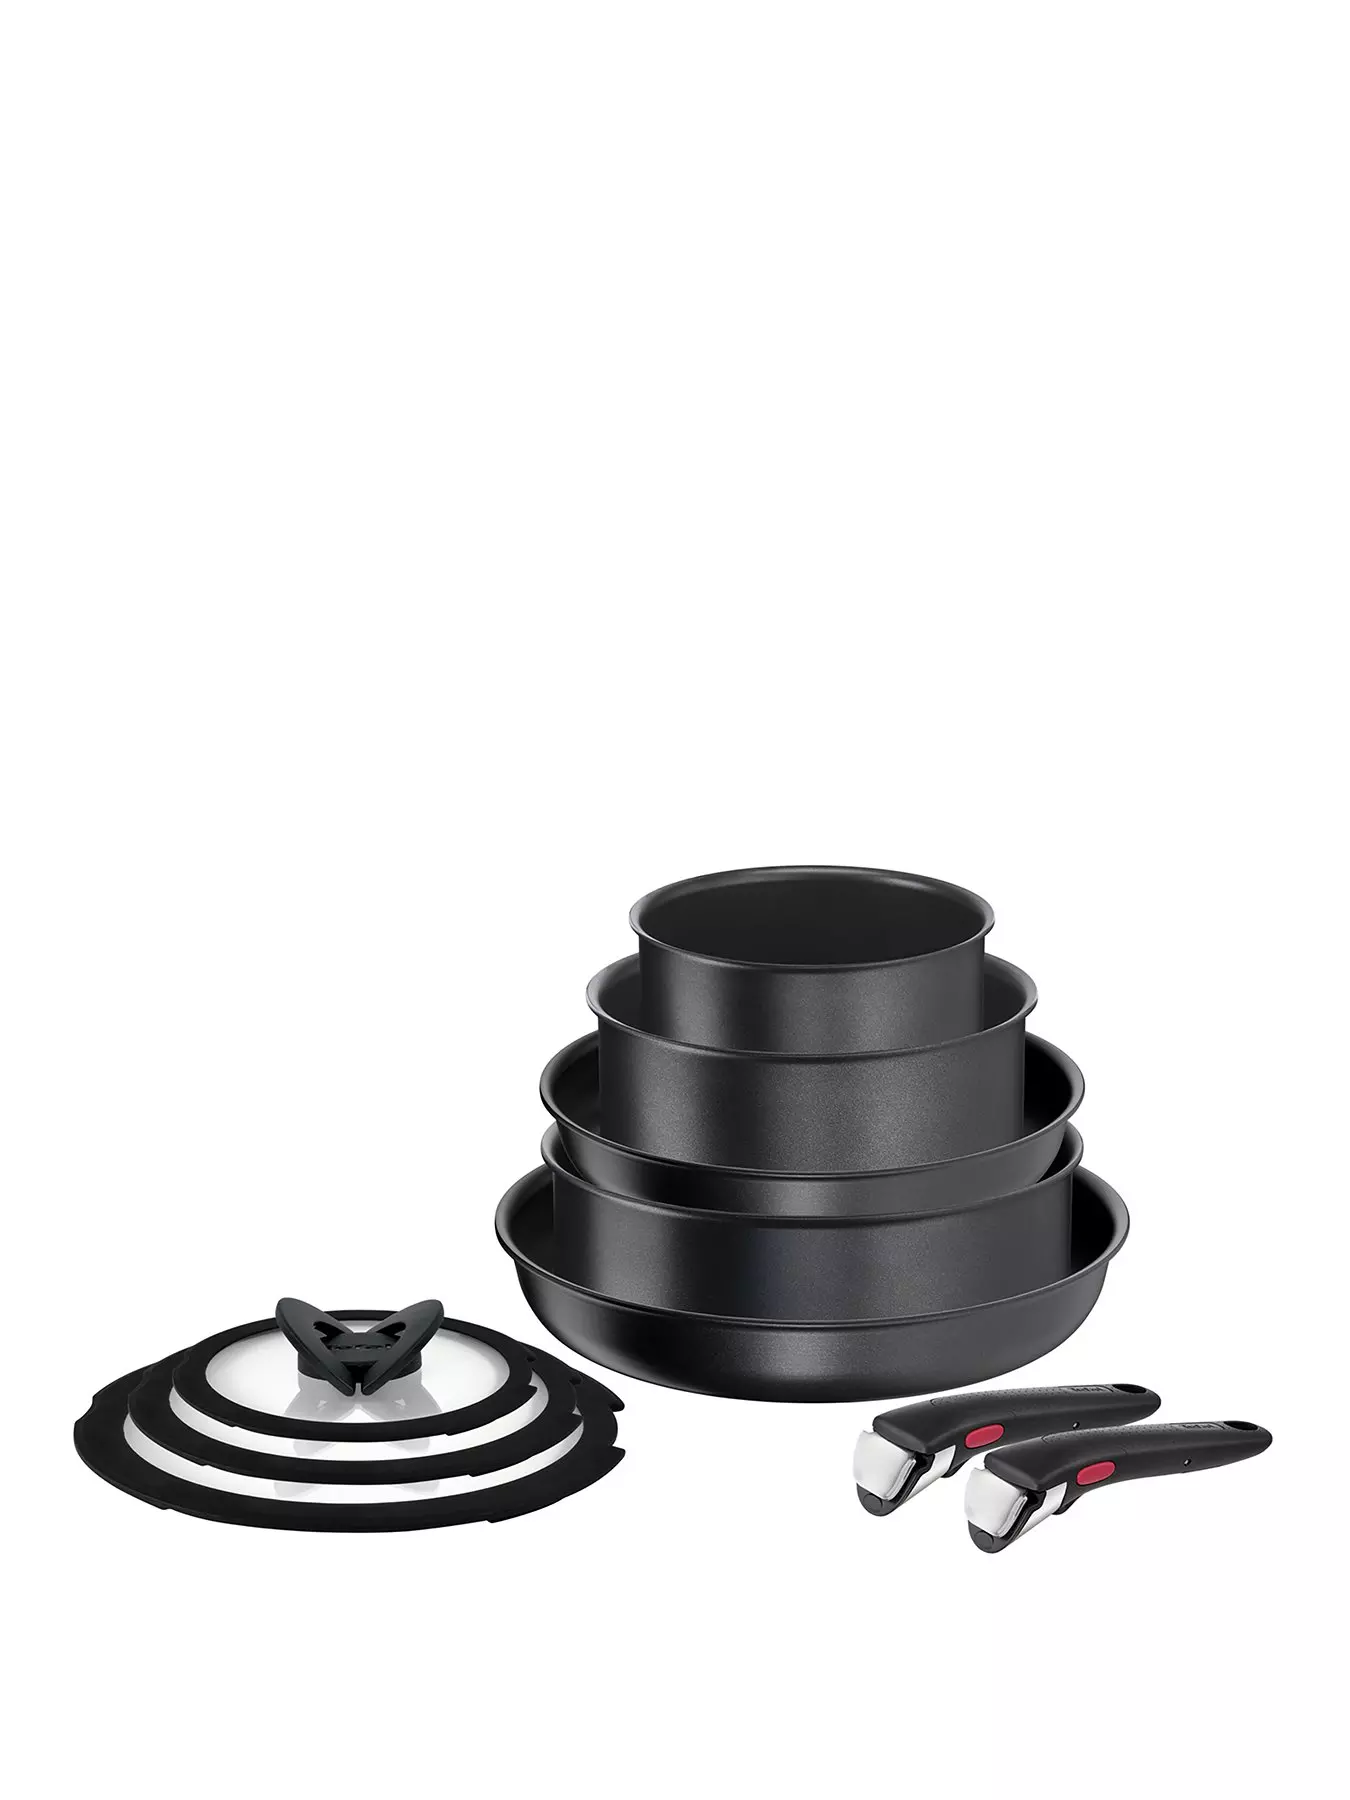 https://media.very.co.uk/i/very/VLJPD_SQ1_0000000088_NO_COLOR_SLf/tefal-ingenio-daily-chef-10pc-removable-handle-stackable-induction-pan-set-l7629142.jpg?$180x240_retinamobilex2$&$roundel_very$&p1_img=sale_2017&fmt=webp